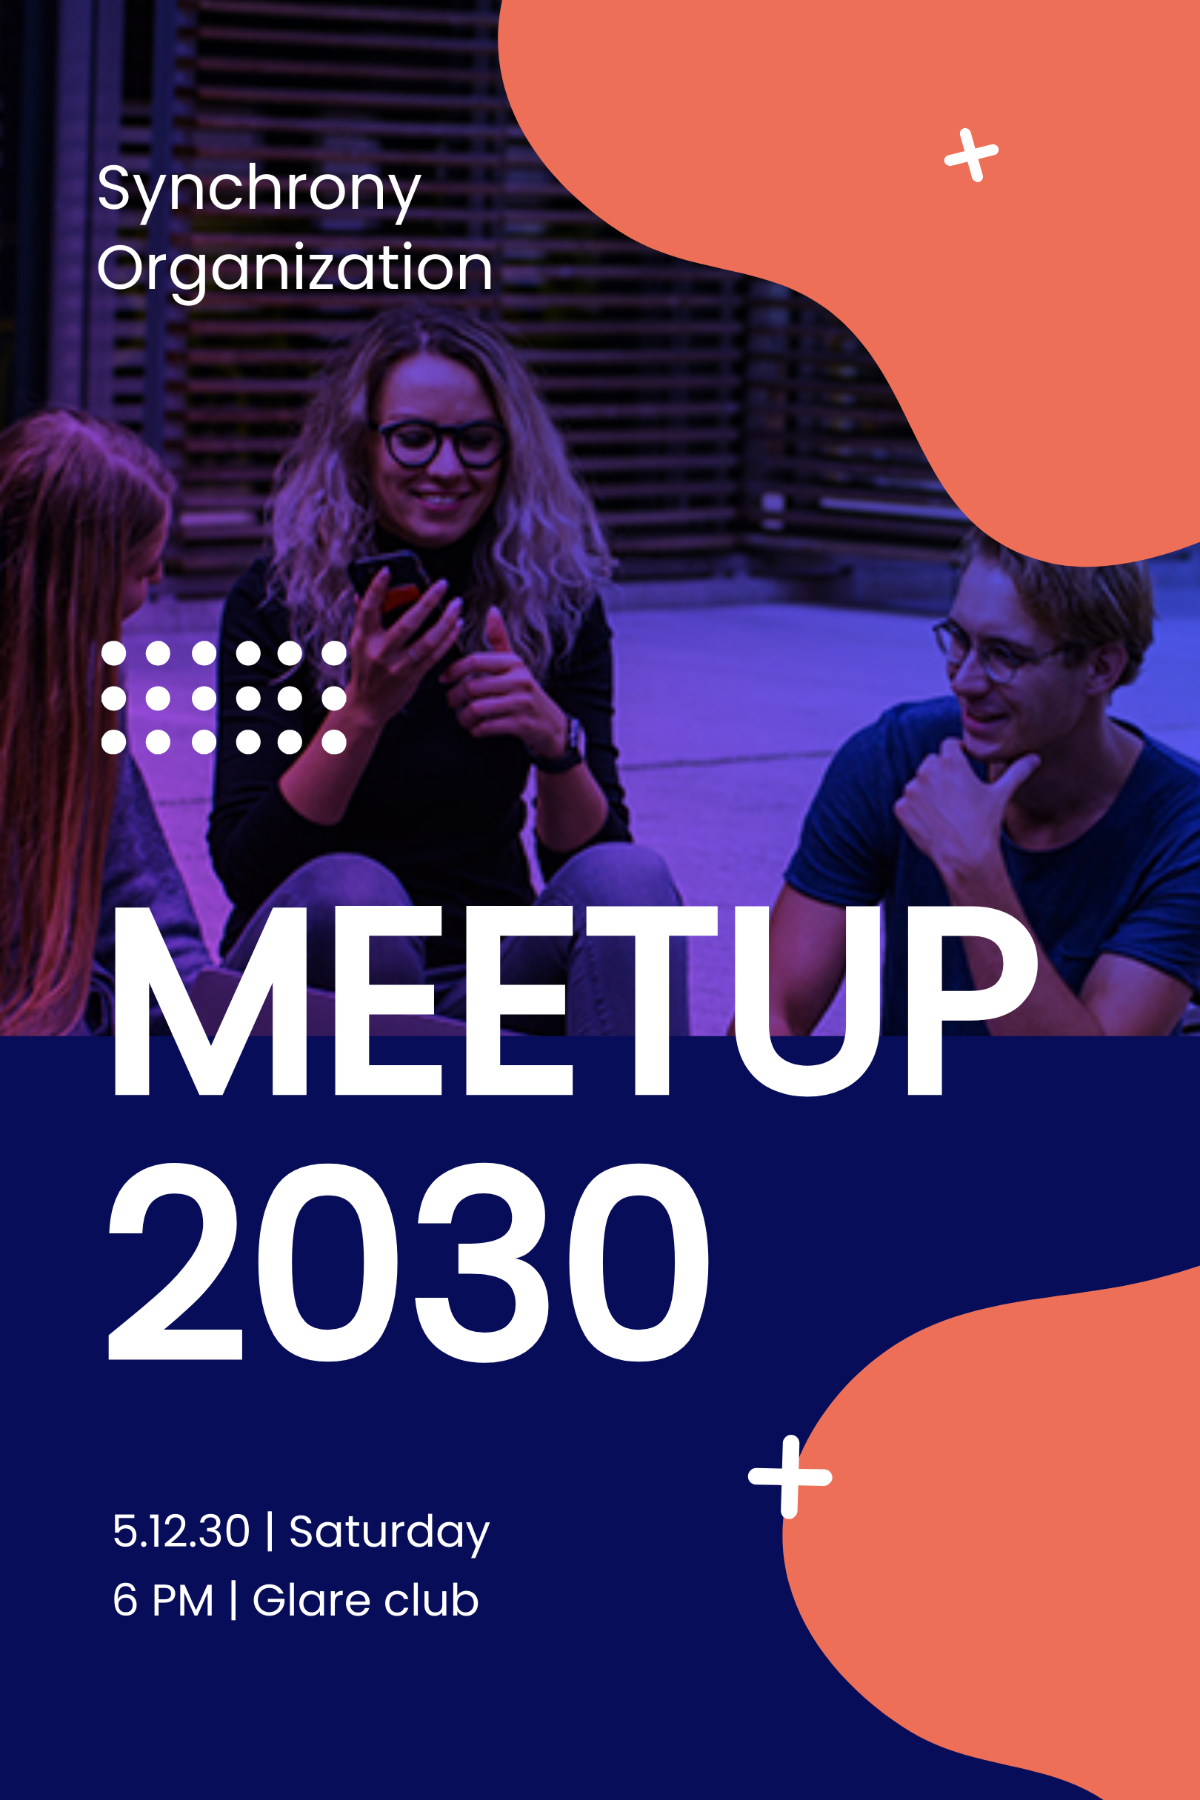 Free Meetup Event Tumblr Post Template